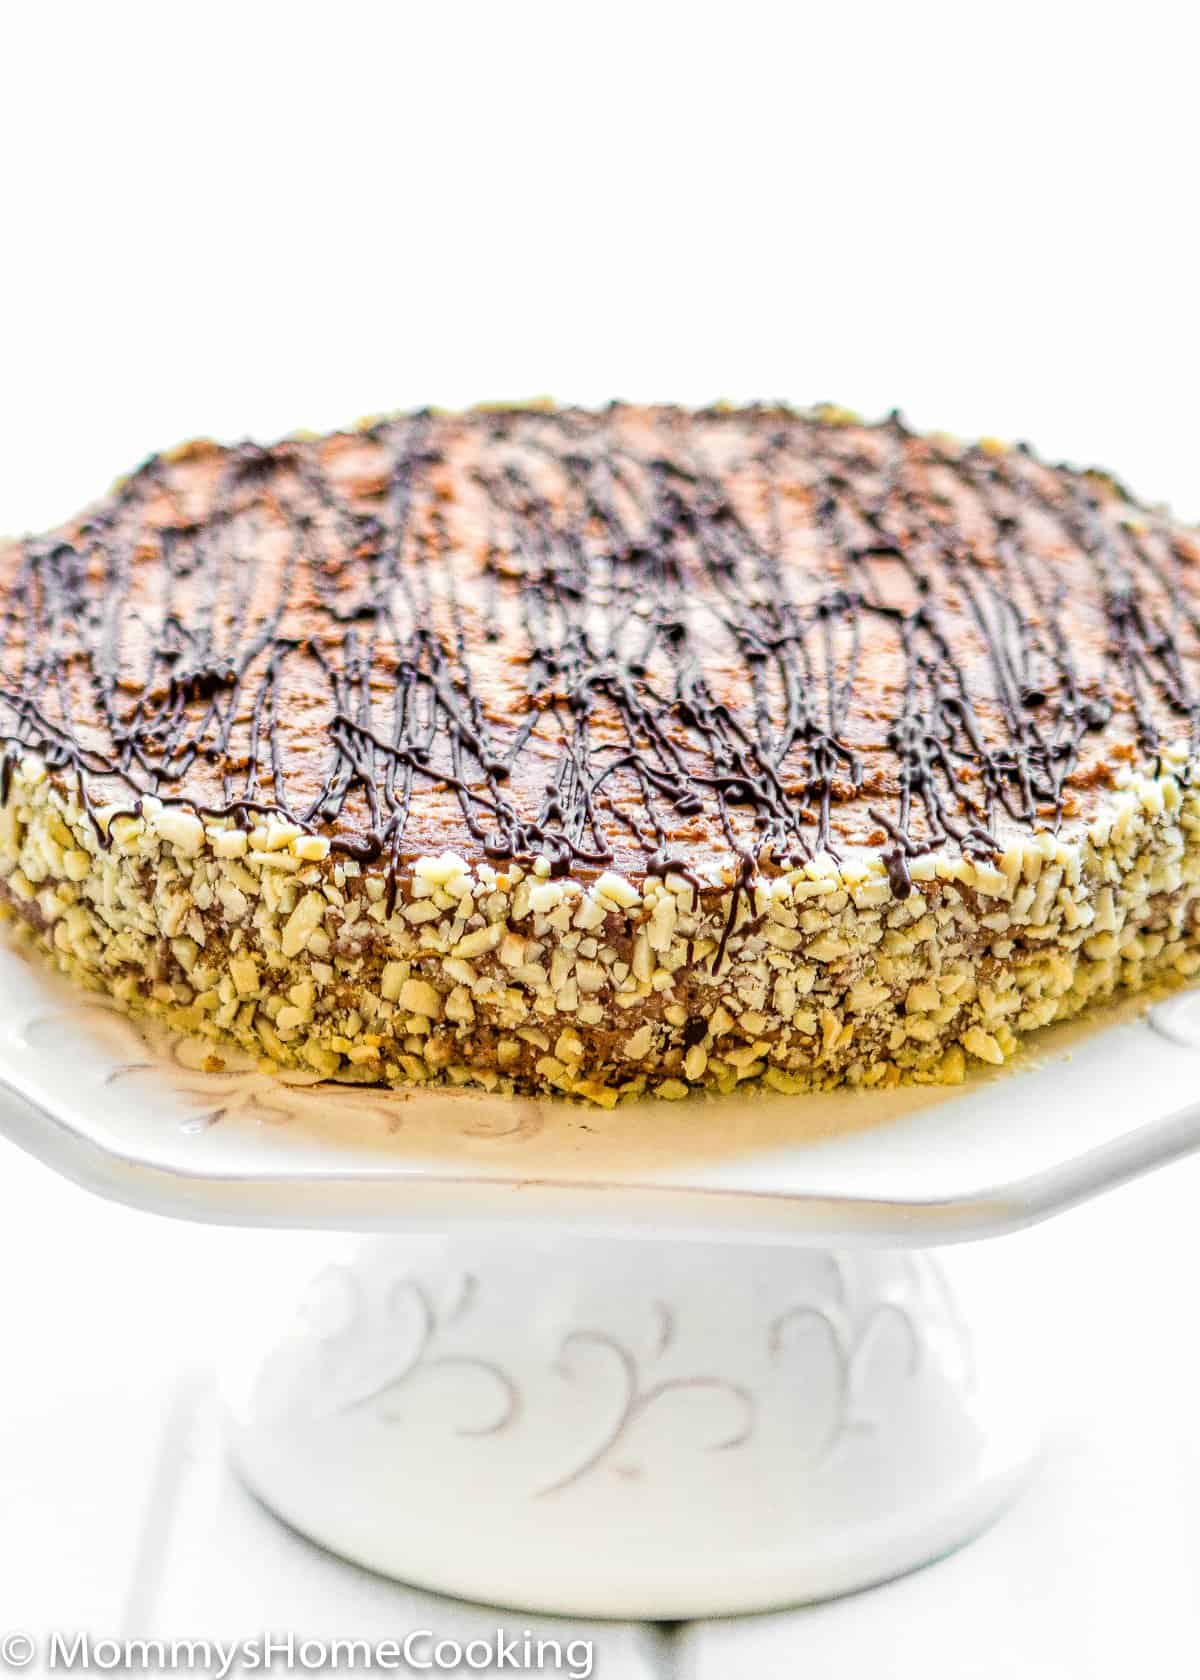 Venezuelan Chocolate Marquesa with chocolate drizzle and chopped nuts on a cake stand